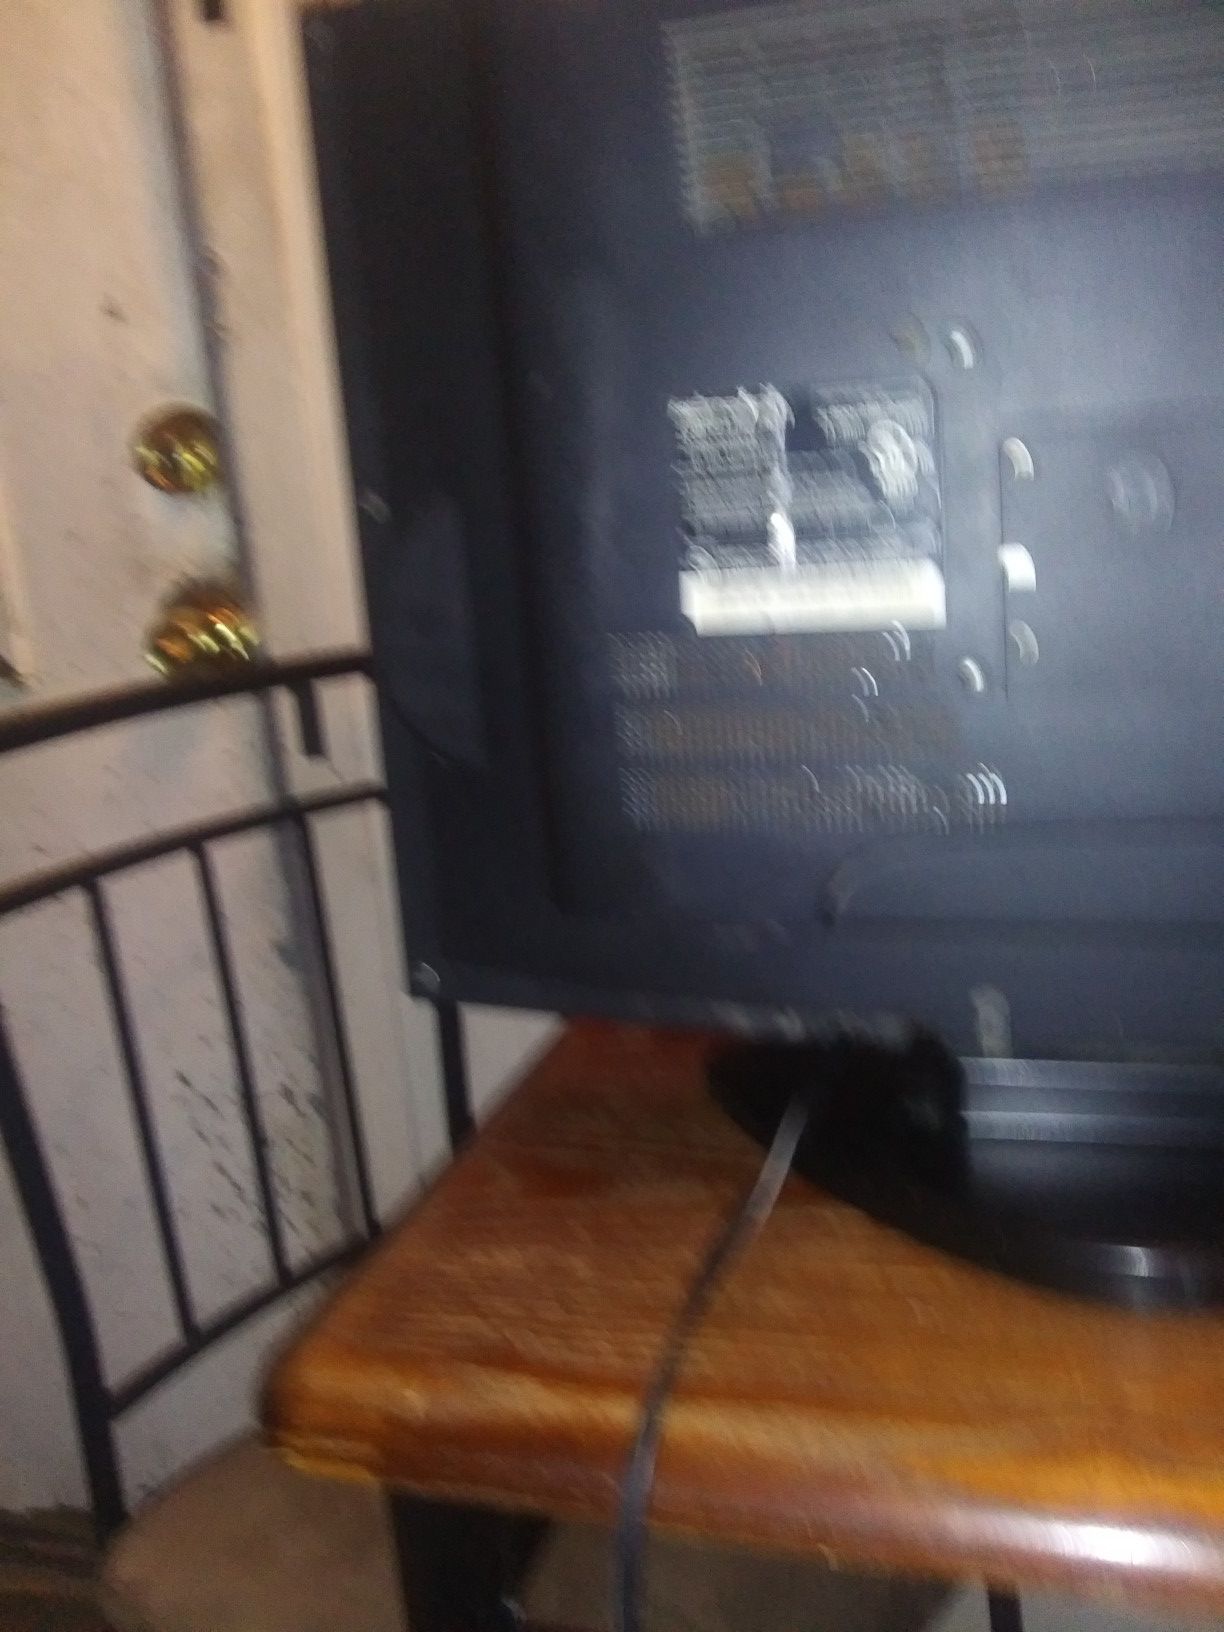 TV for sale 20in in good condition